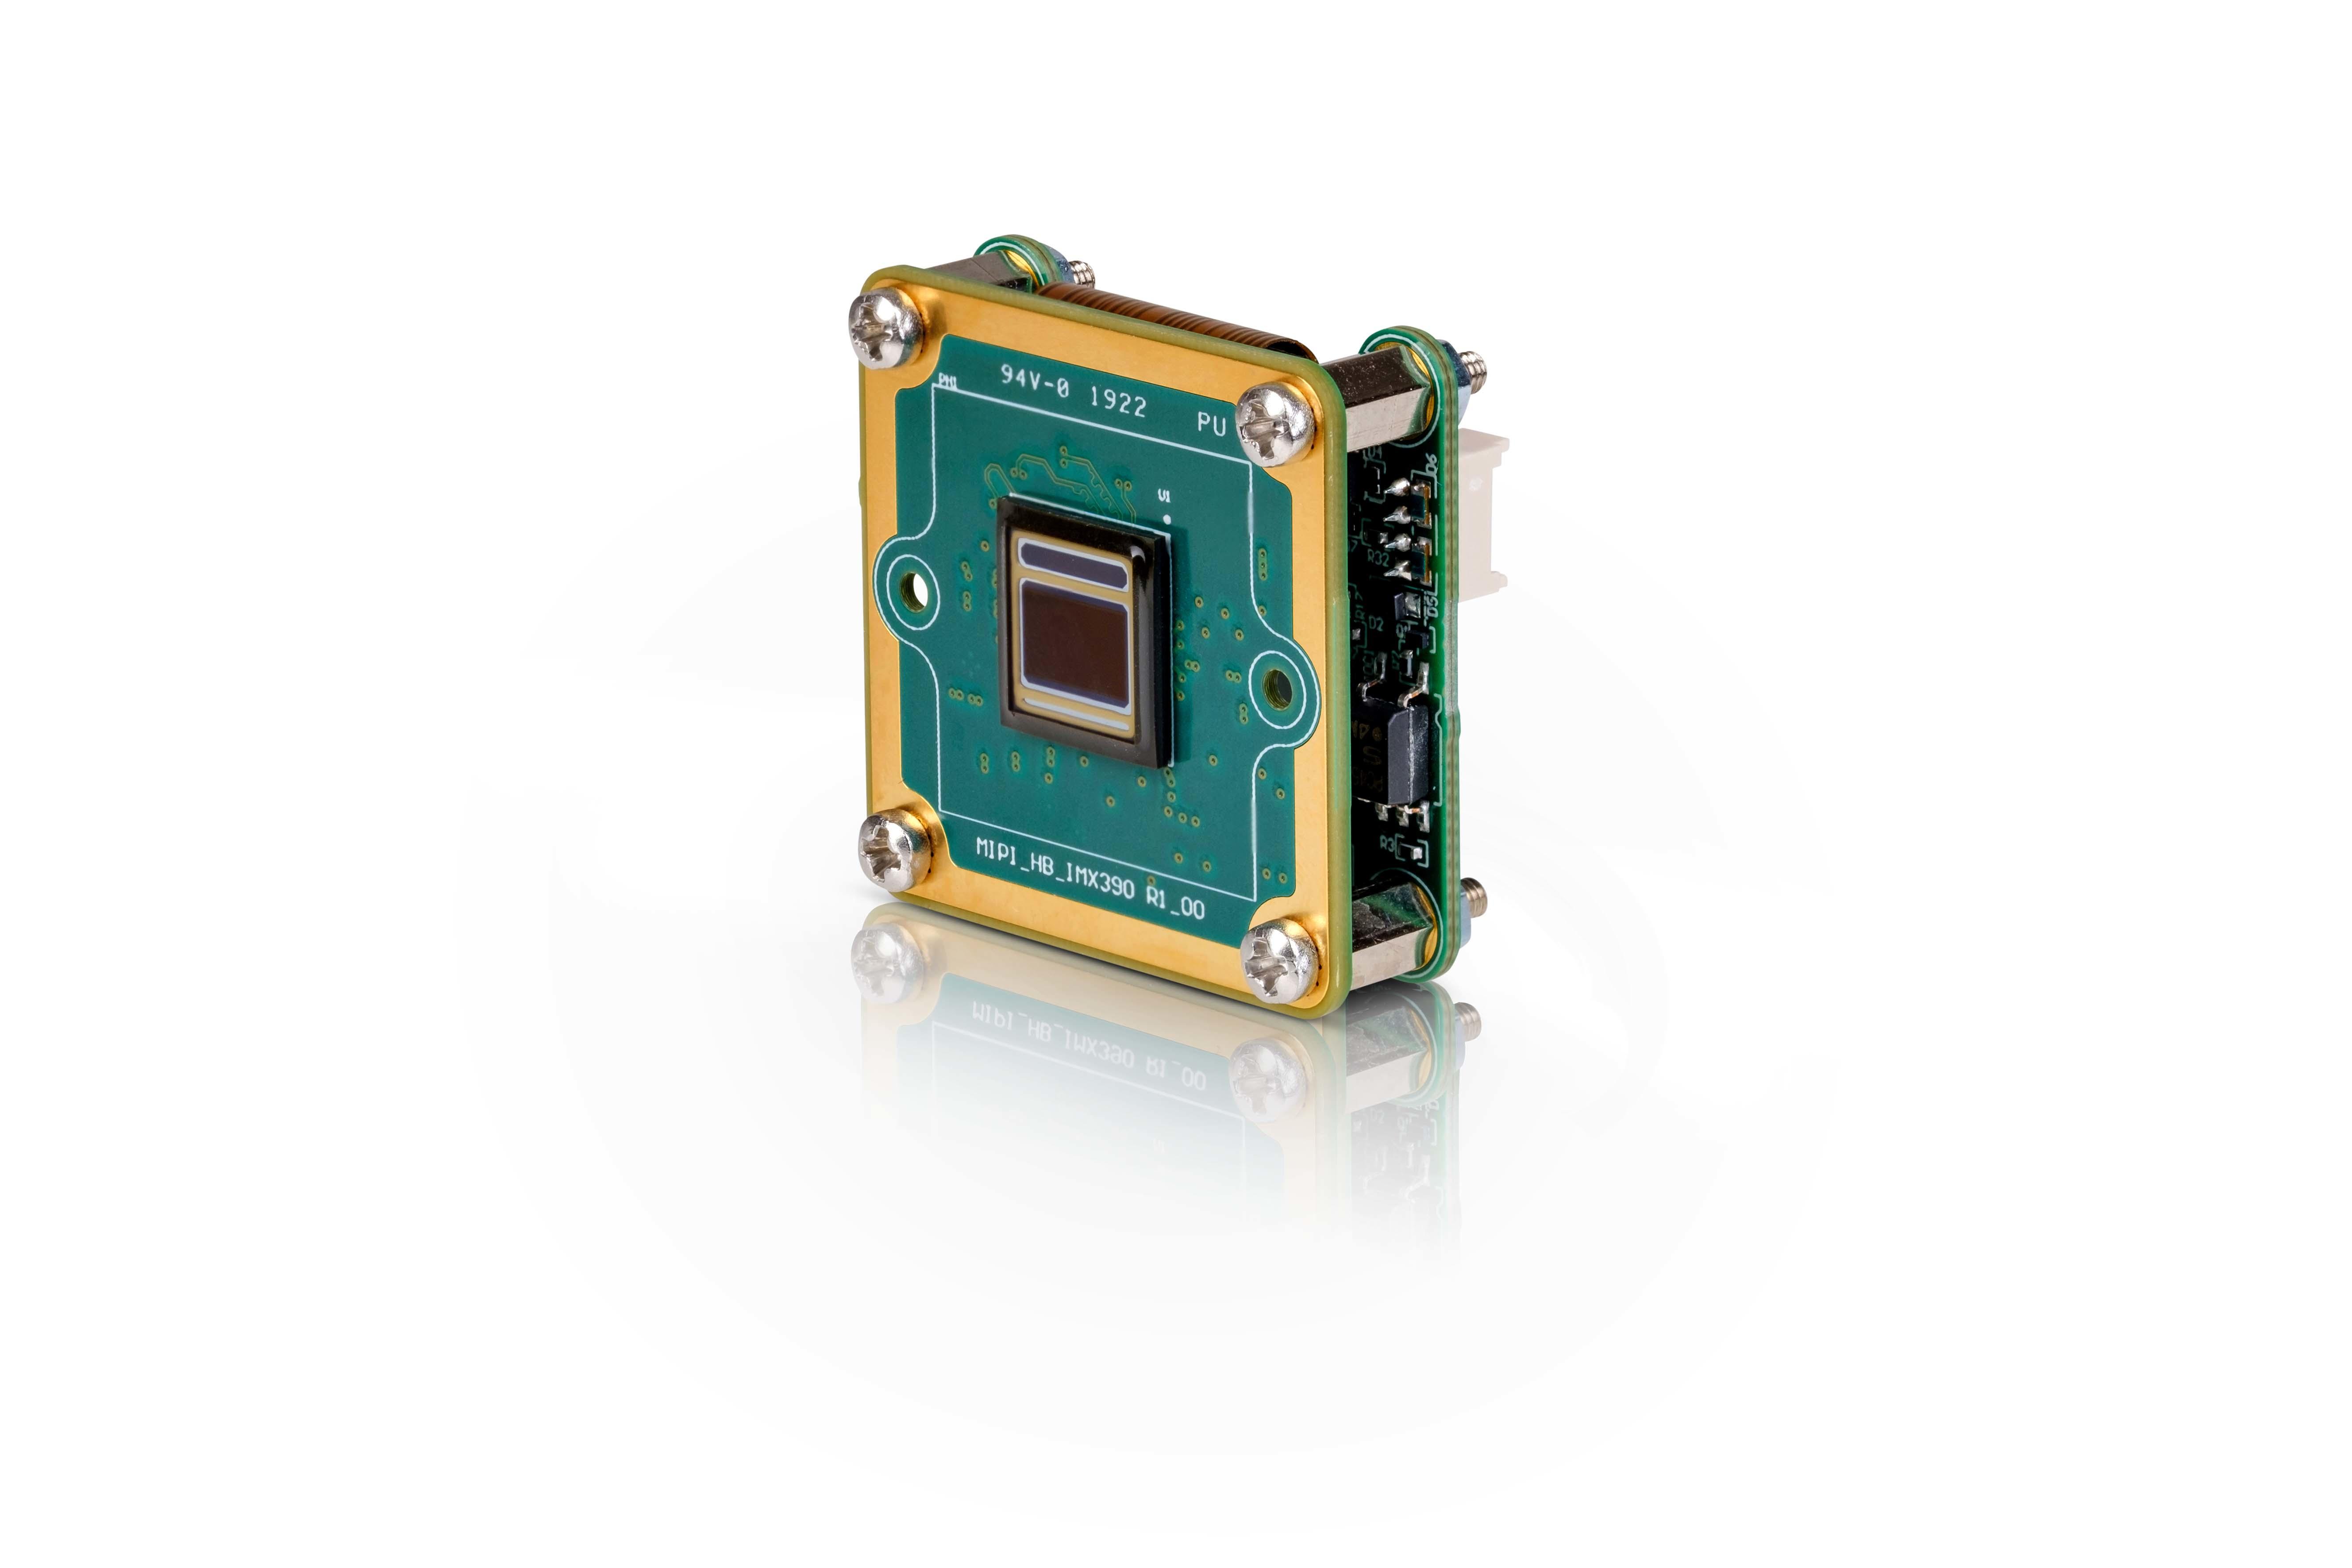 The Imaging Source 2.3MP 1/2.6" Embedded Board Camera